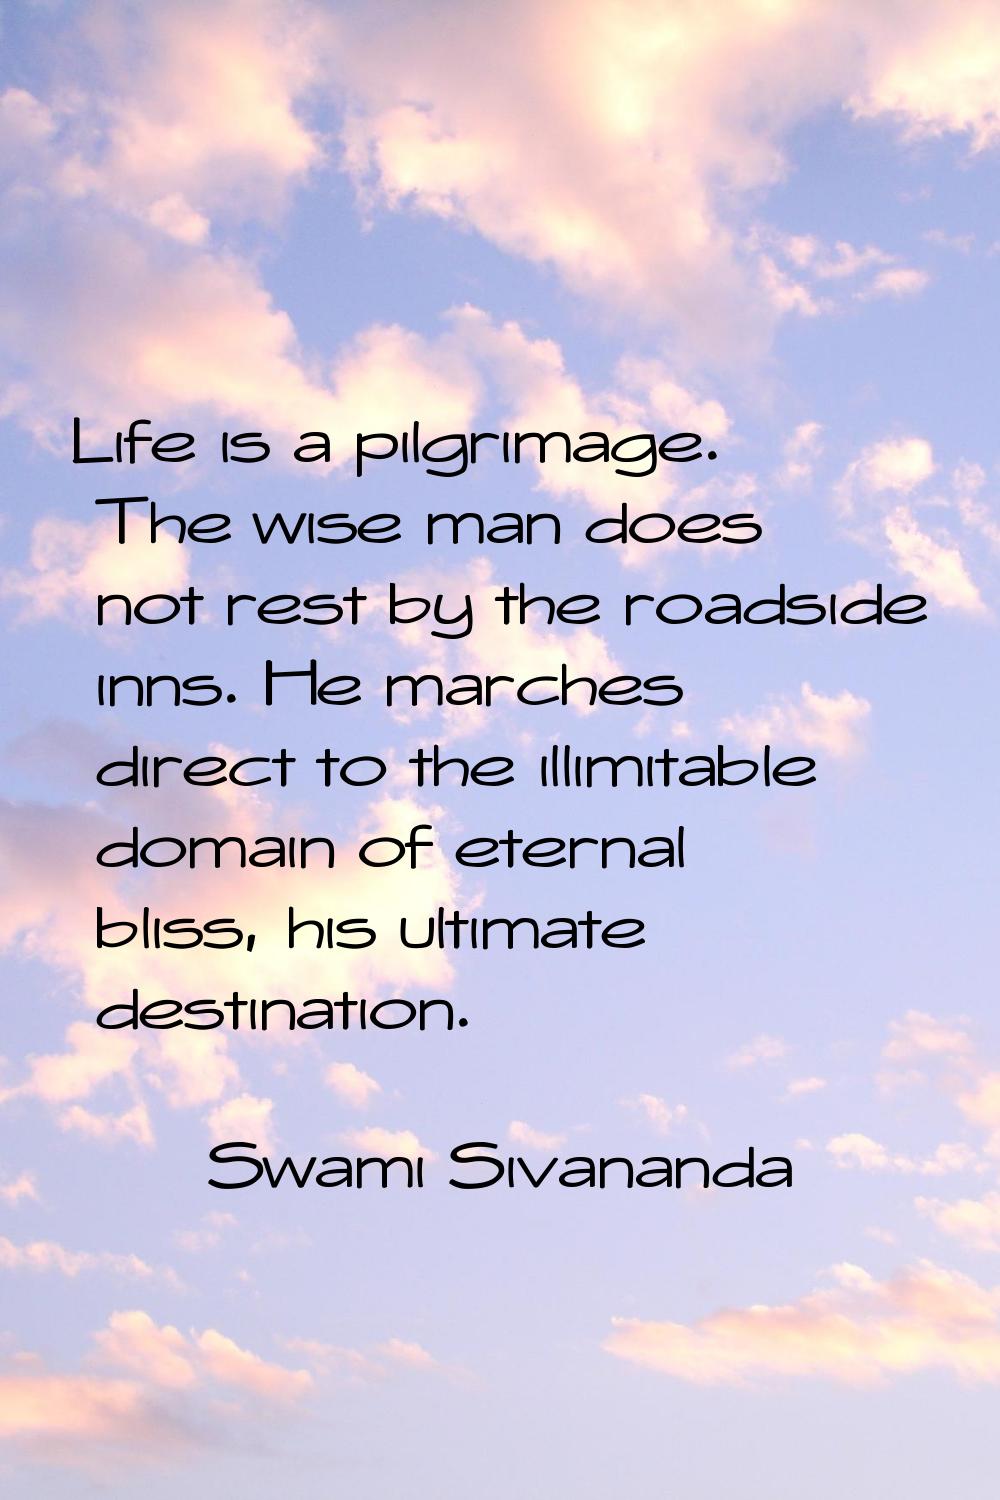 Life is a pilgrimage. The wise man does not rest by the roadside inns. He marches direct to the ill